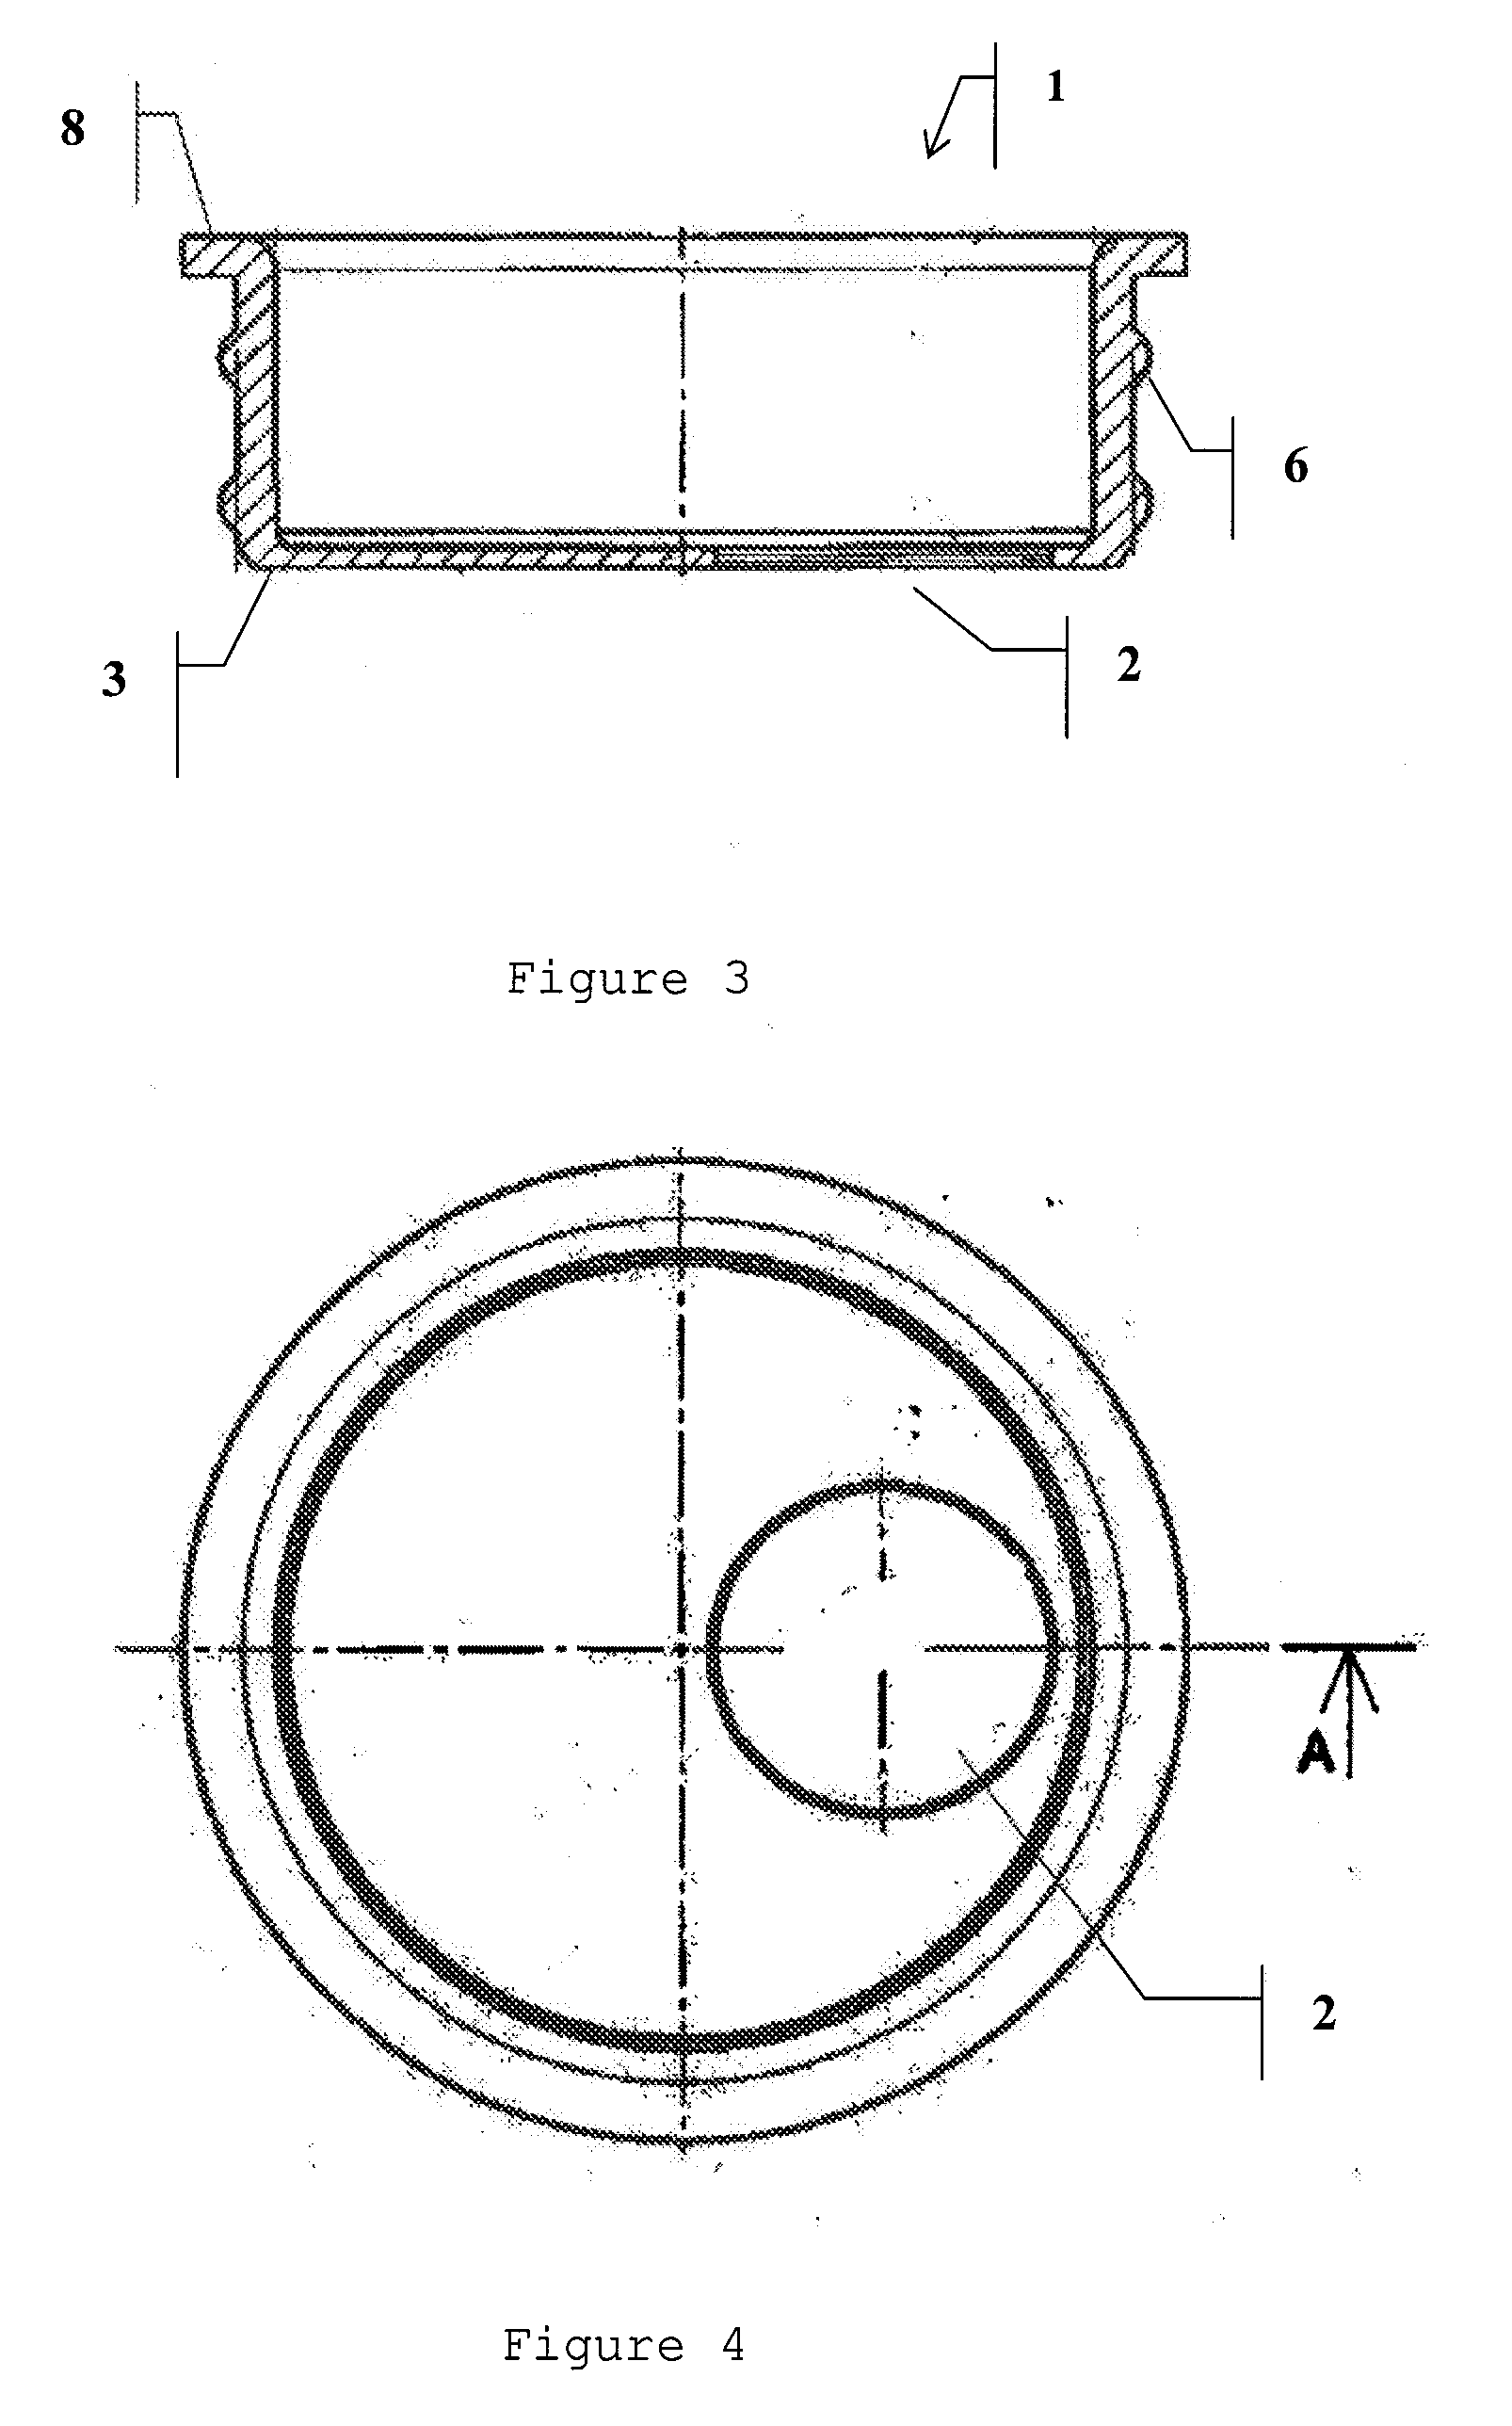 Device for Distributing and/or Controlling the Discharge of Unitary Products, Fitted Onto a Container, and For the In-Situ Treatment of its Internal Atmosphere